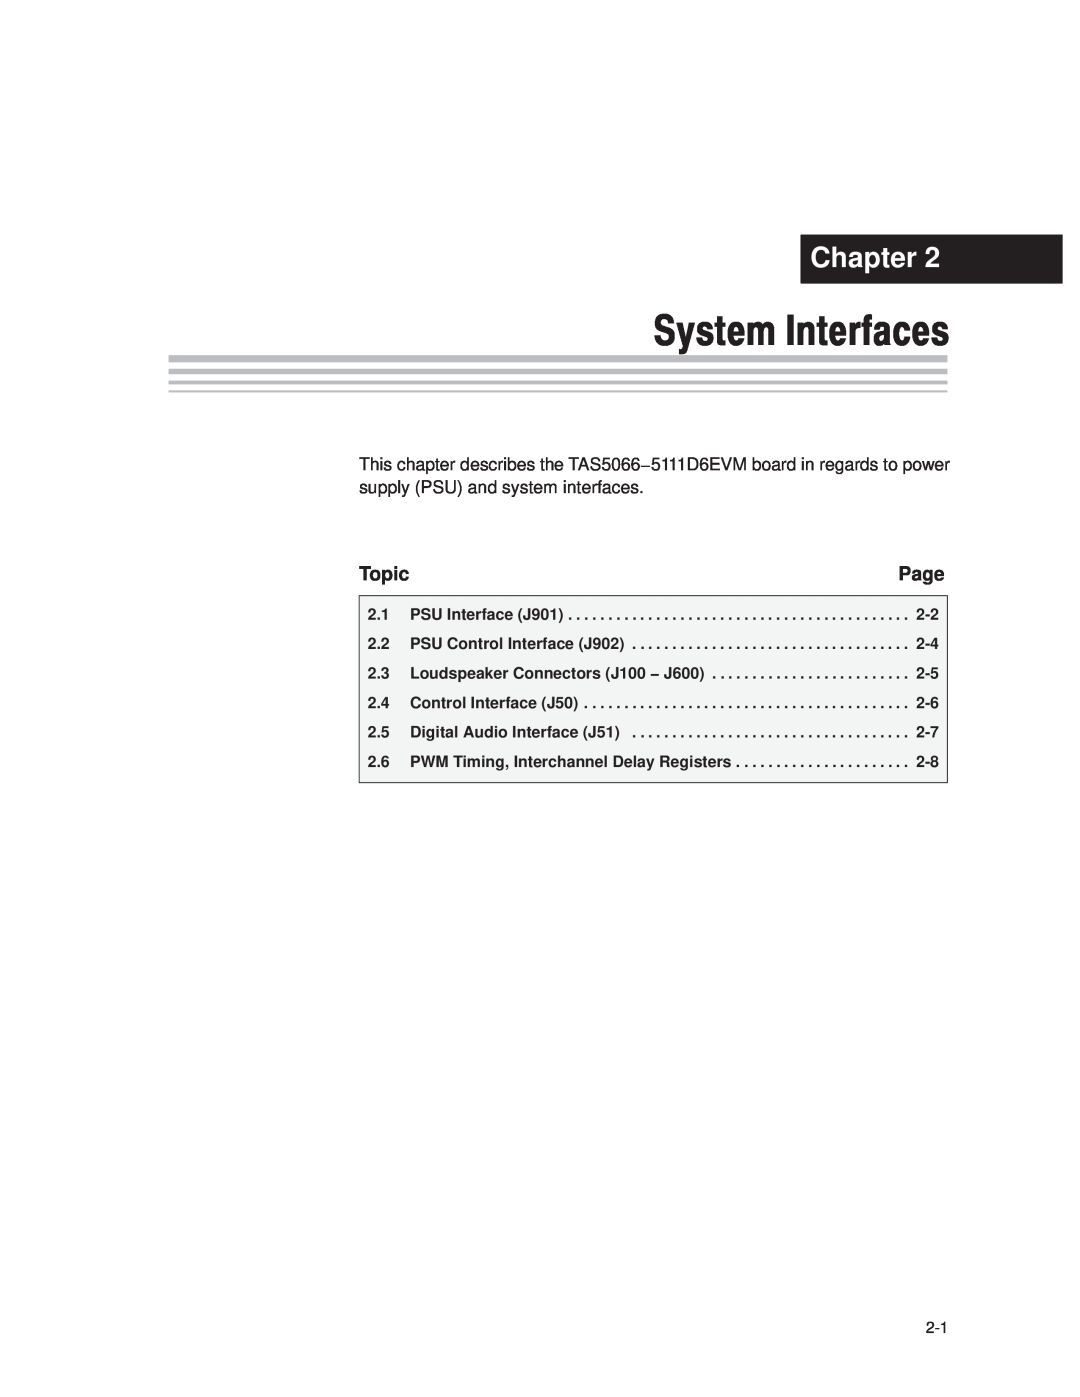 Texas Instruments TAS5066PAG manual System Interfaces, Chapter, Page, Topic 